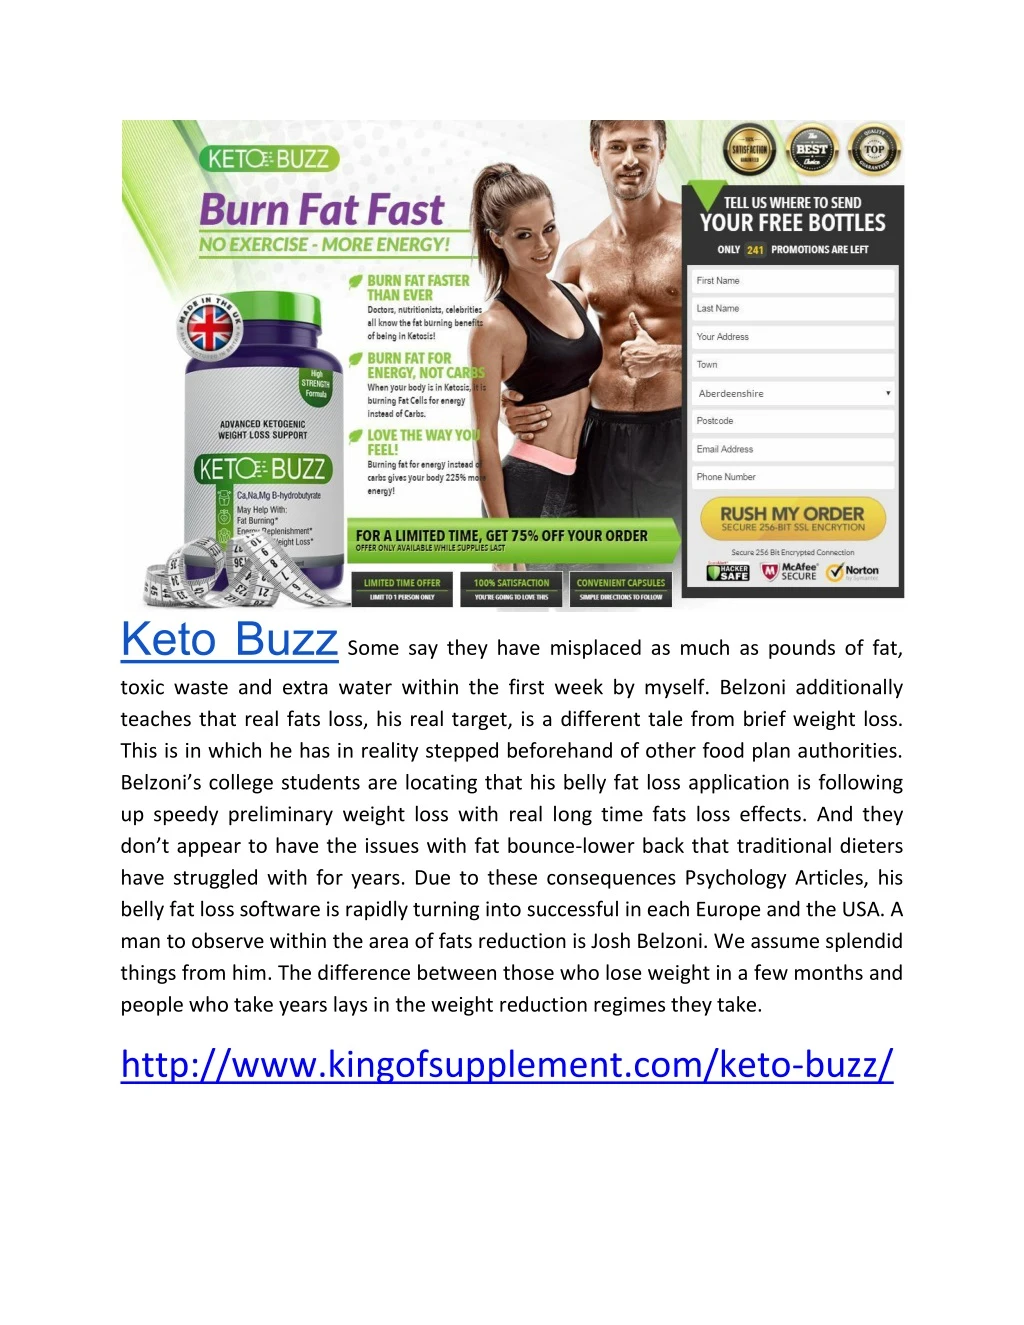 keto buzz some say they have misplaced as much